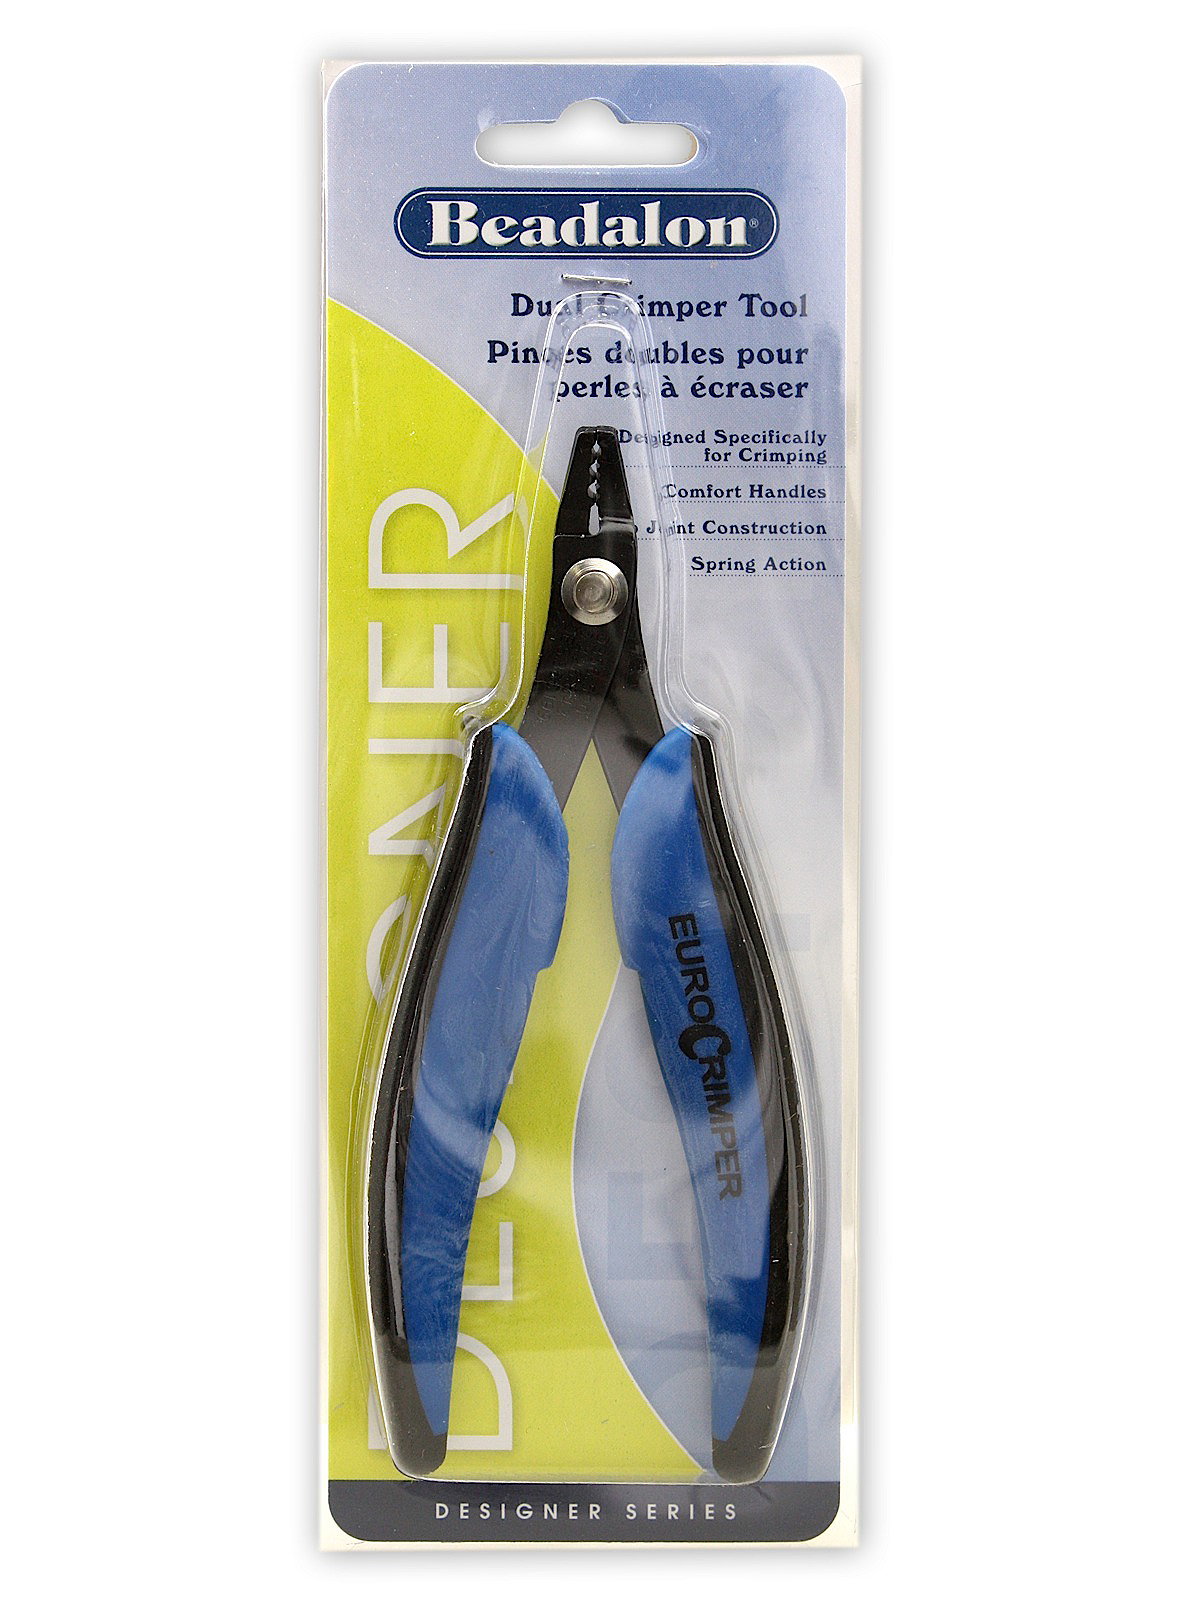 Beadalon Bead Crimper Tool for Jewelry Making - Use Pliers with Beading  Jewelry Wire and Crimp Beads or Tubes for Professional Designers and Makers  of